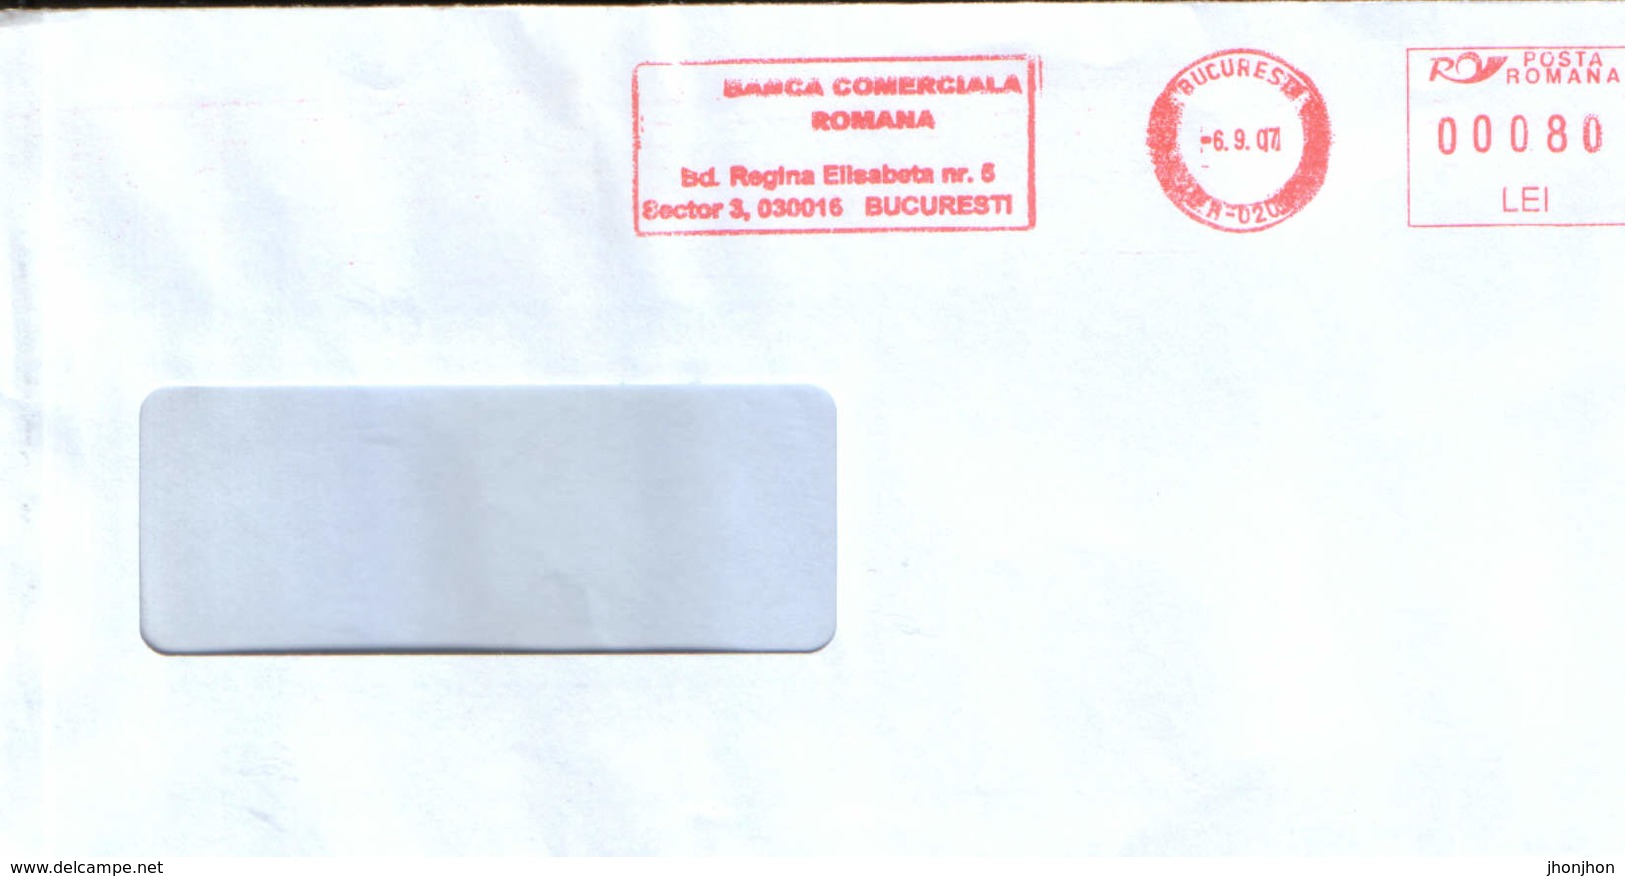 Romania - Cover (Letter) Personalized - Commercial Bank, Circulated In 2007 - Machine Footprints - Maschinenstempel (EMA)